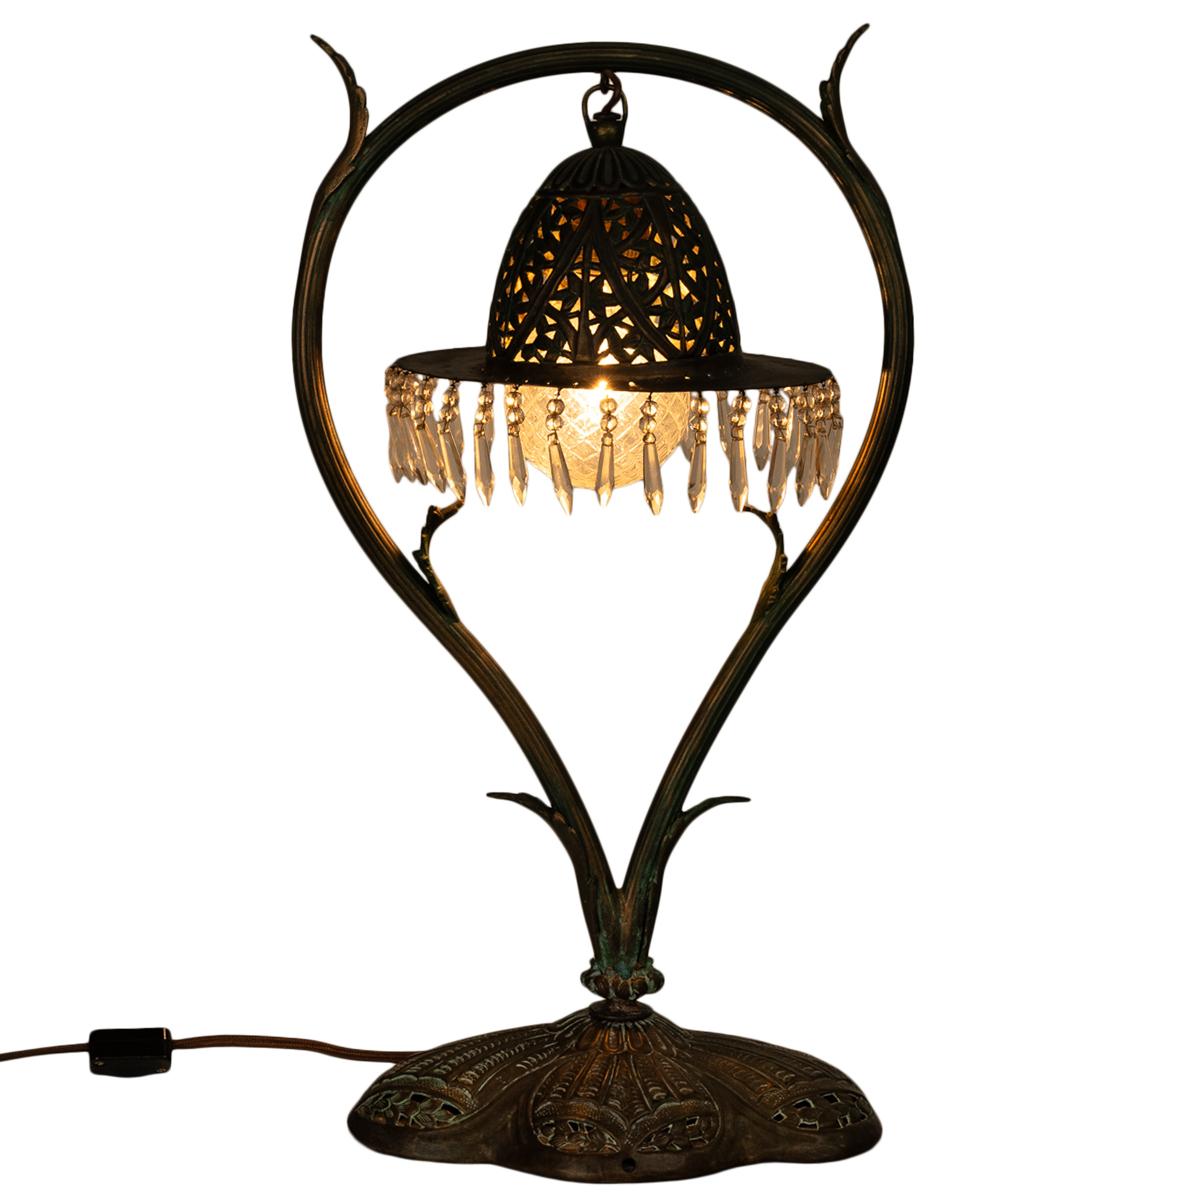 A very handsome antique Austrian Art Nouveau bronze table lamp with glass prisms, circa 1900.
The lamp of organic form with a 'balloon' shaped harp, that is ribbed and decorated with six stylized leaves. From the top of the harp hangs a pierced &